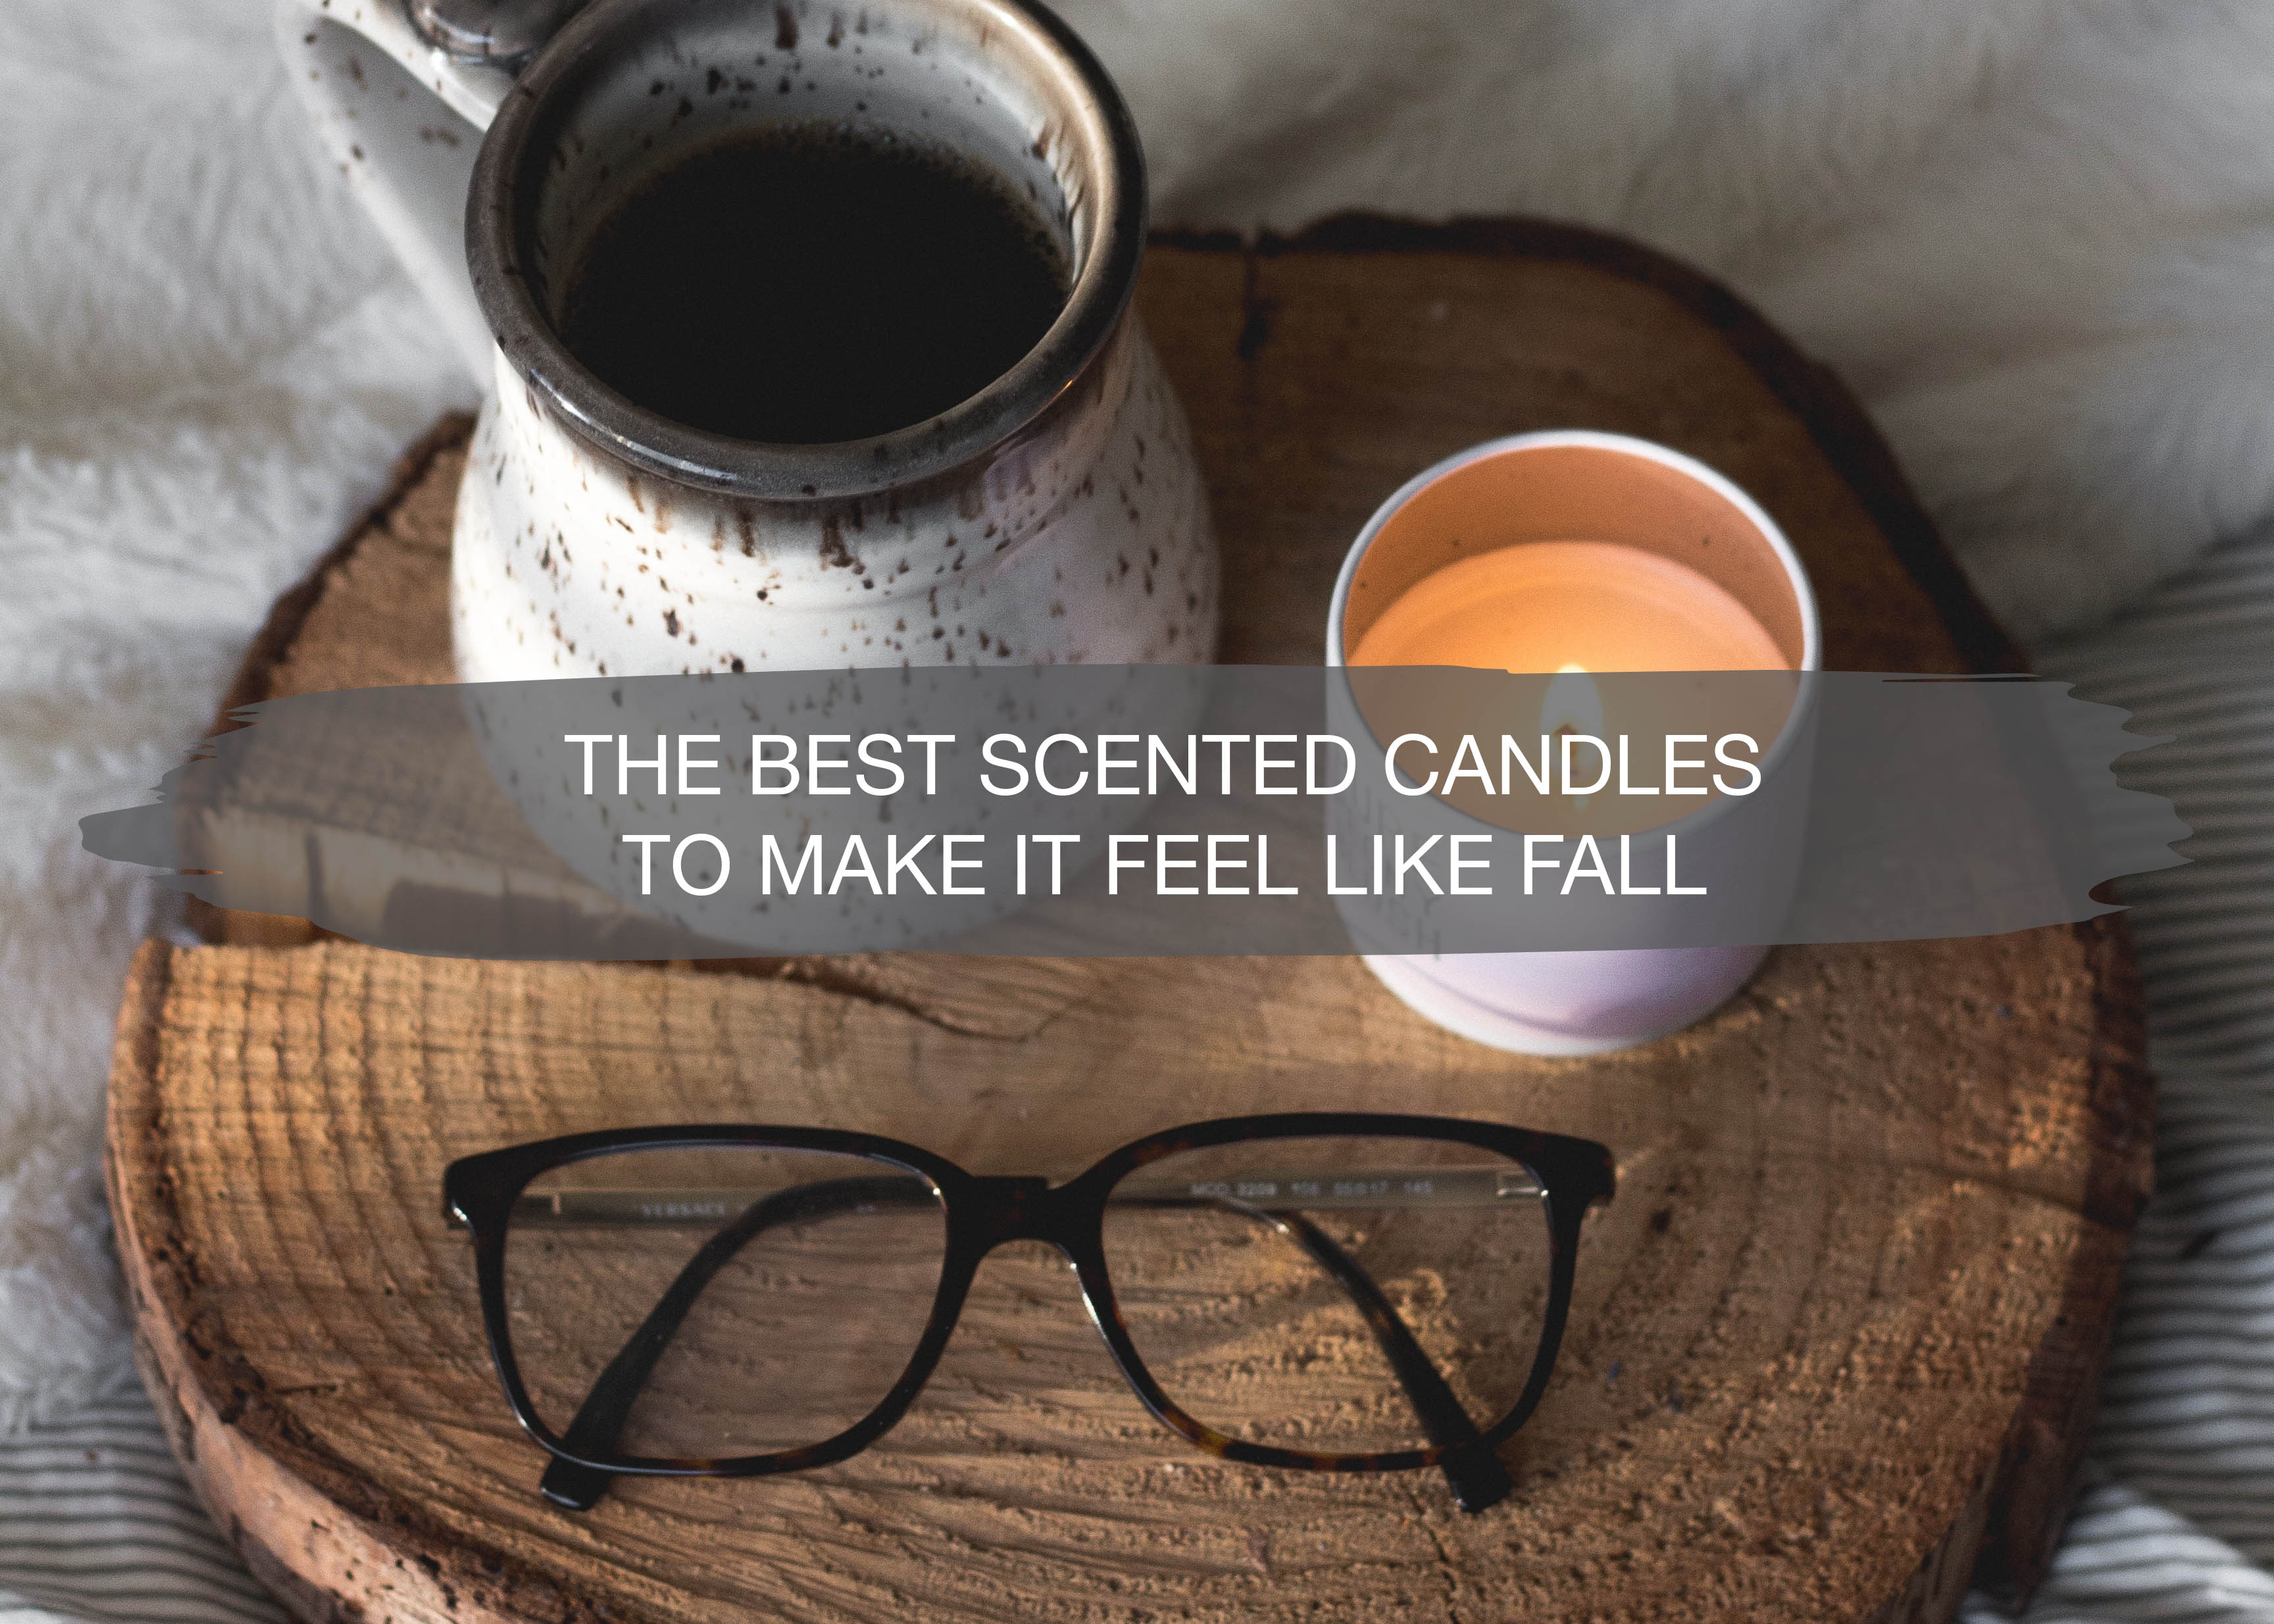 The Best Scented Candles to Make it Feel Like Fall 6